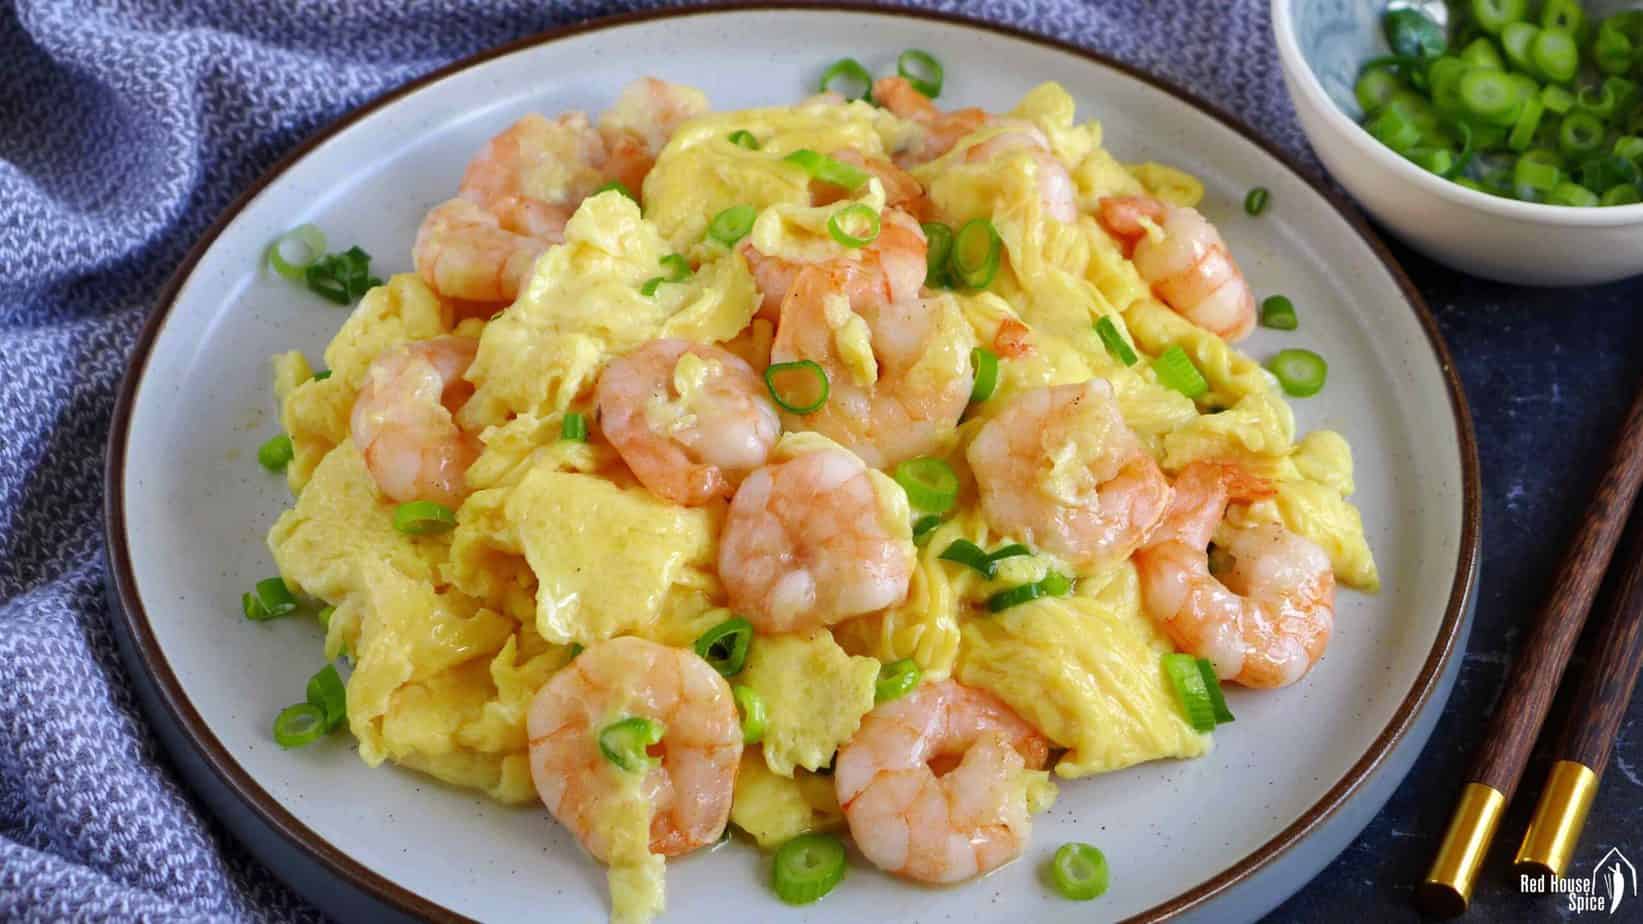 A plate of Chinese shrimp and egg stir-fry